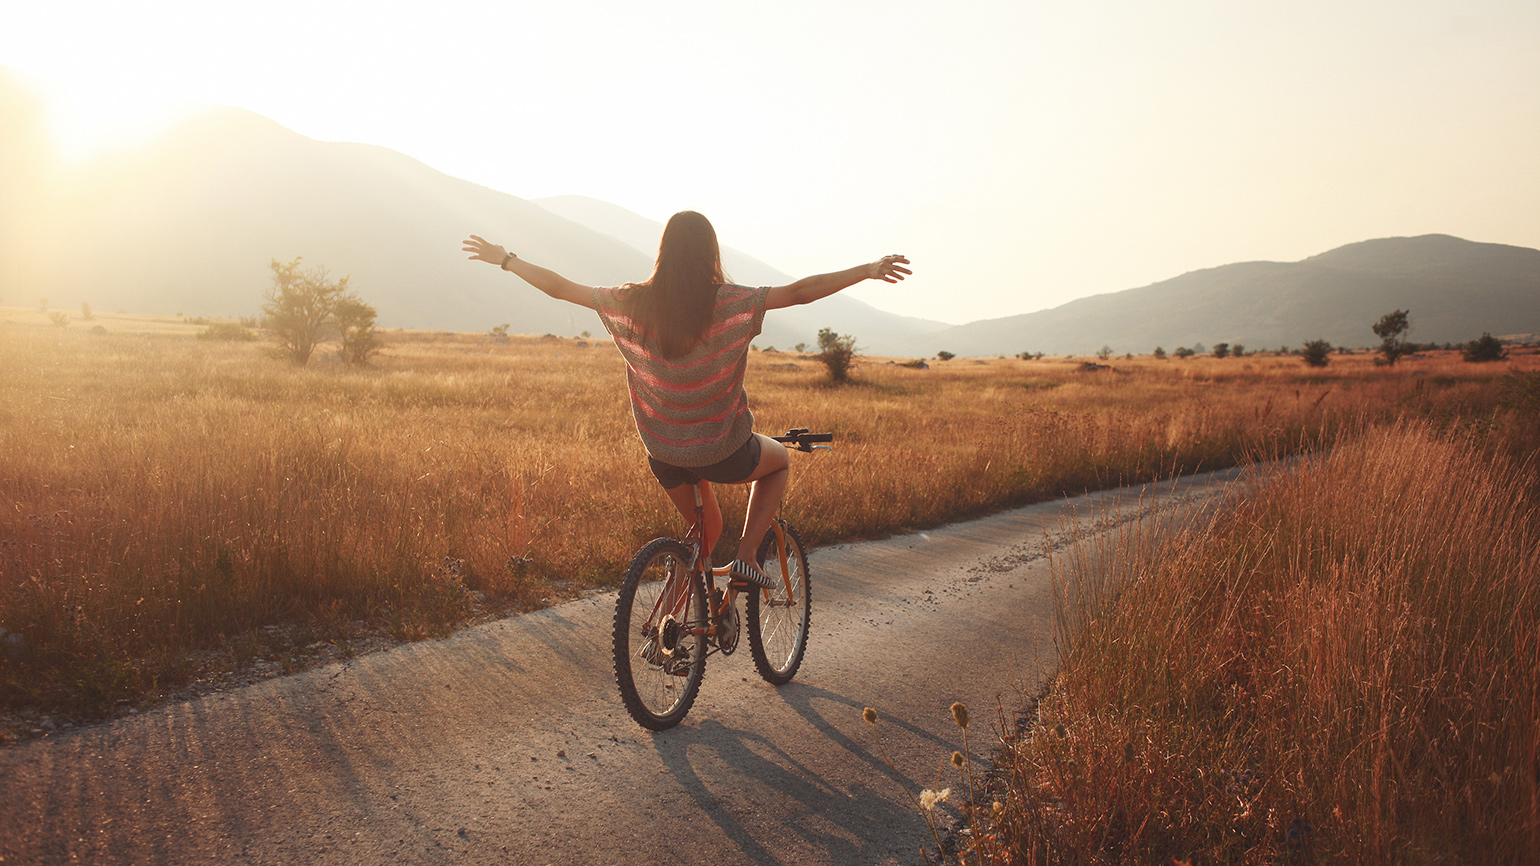 Royalty-Free Stock Photo: Young woman finding joy by riding a bike at sunset.